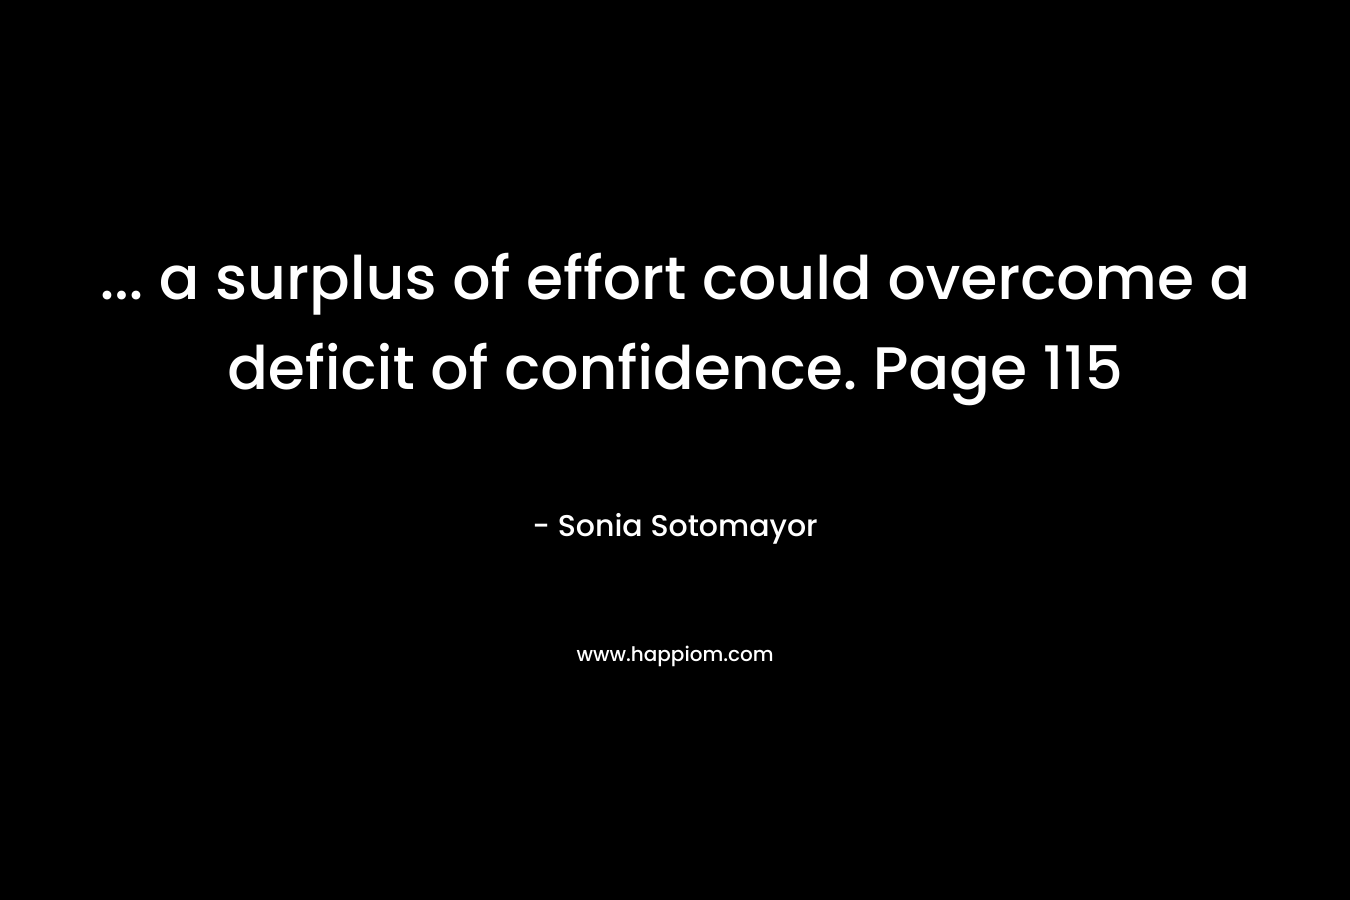 ... a surplus of effort could overcome a deficit of confidence. Page 115